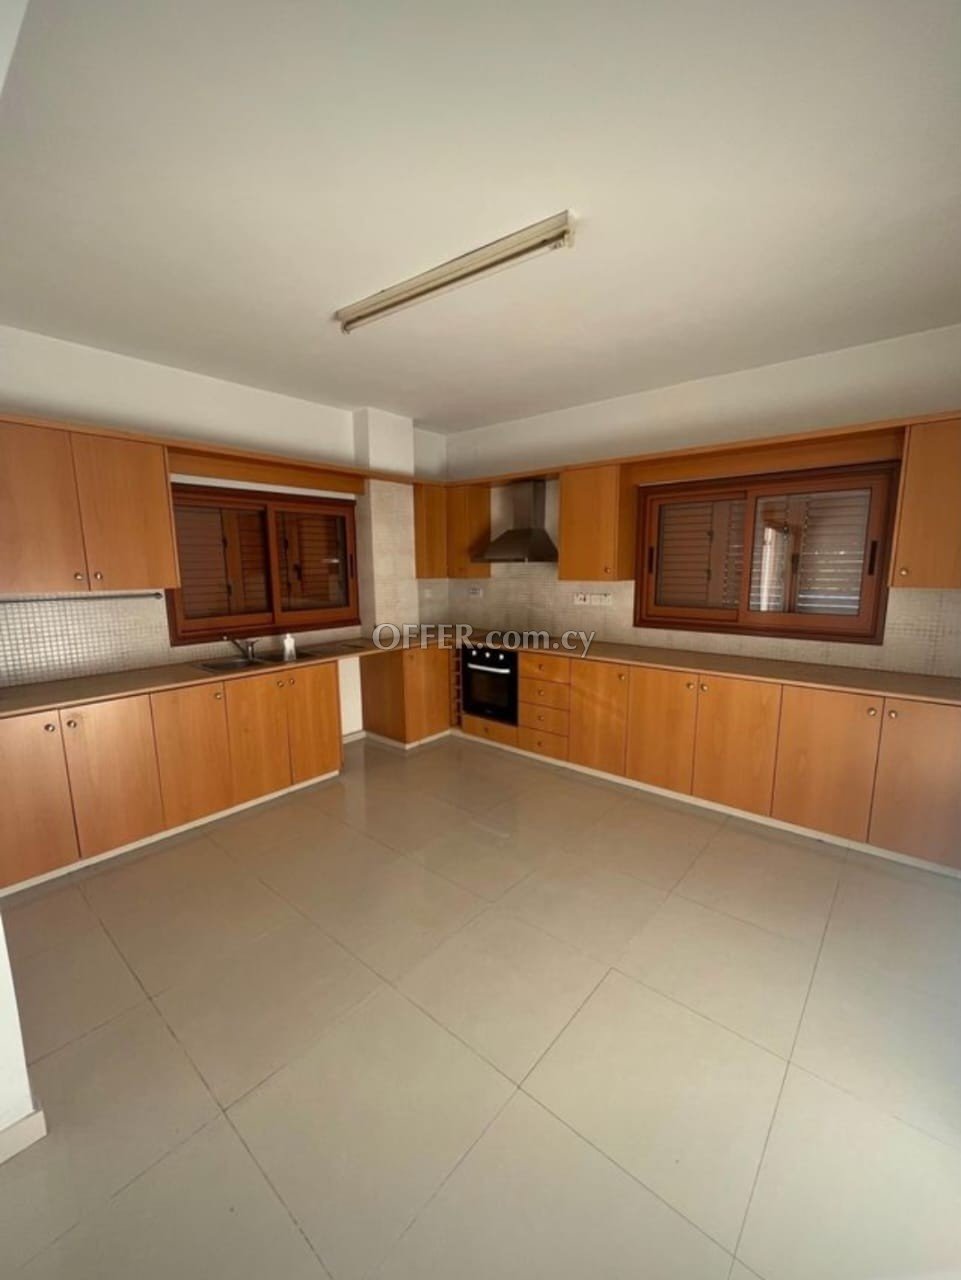 3-bedroom Apartment 90 sqm in Strovolos - 1